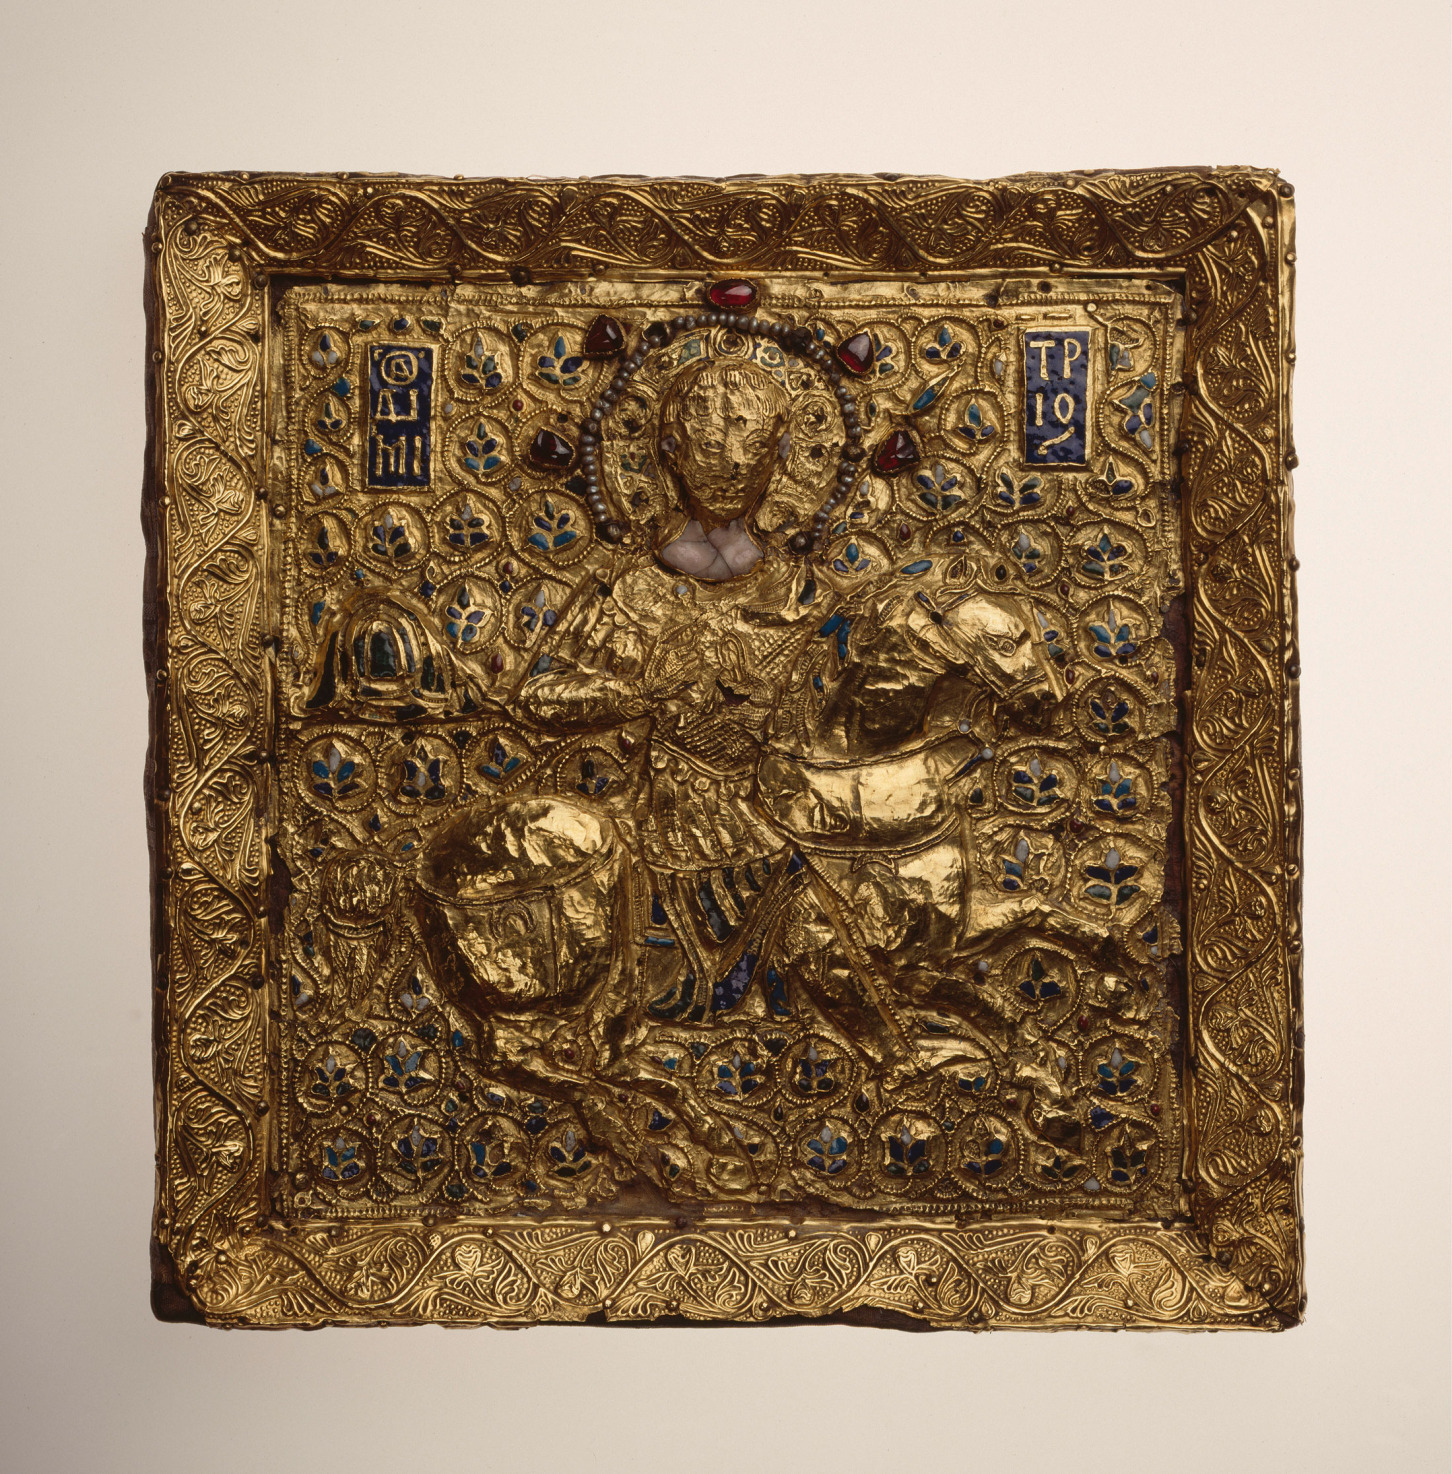 Golden icon with Demetrios, from the Guelph Treasure.